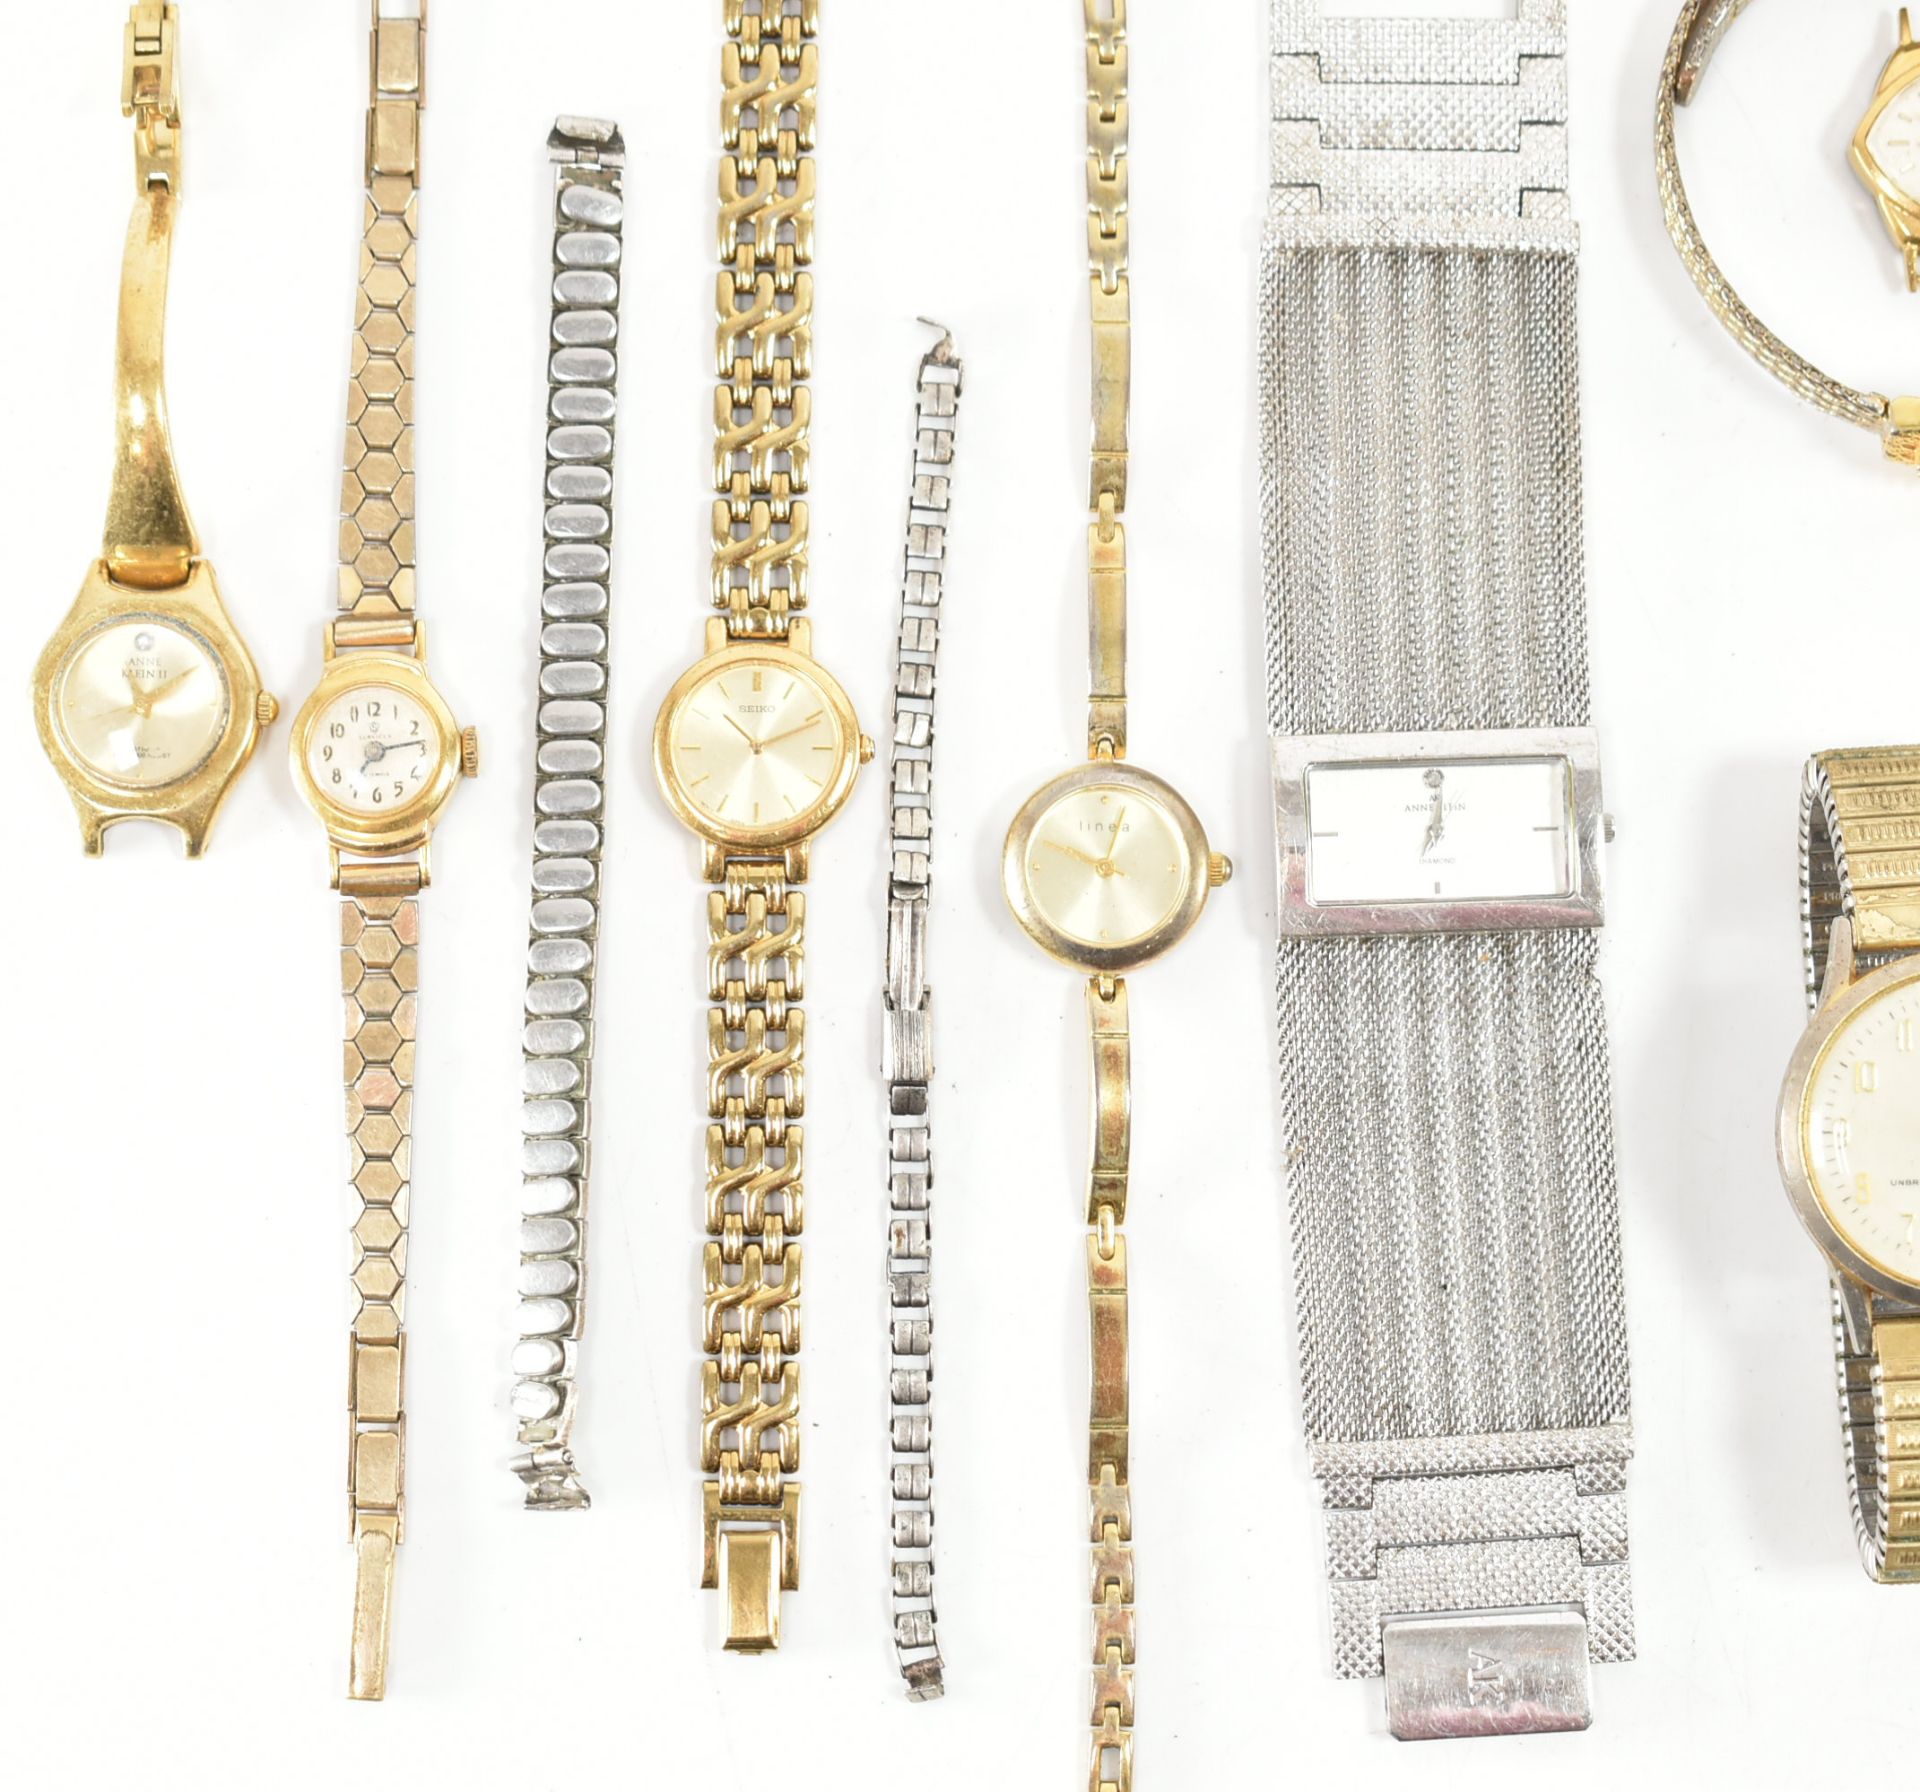 COLLECTION OF ASSORTED GOLD & SILVER TONE WRISTWATCHES - Image 14 of 17